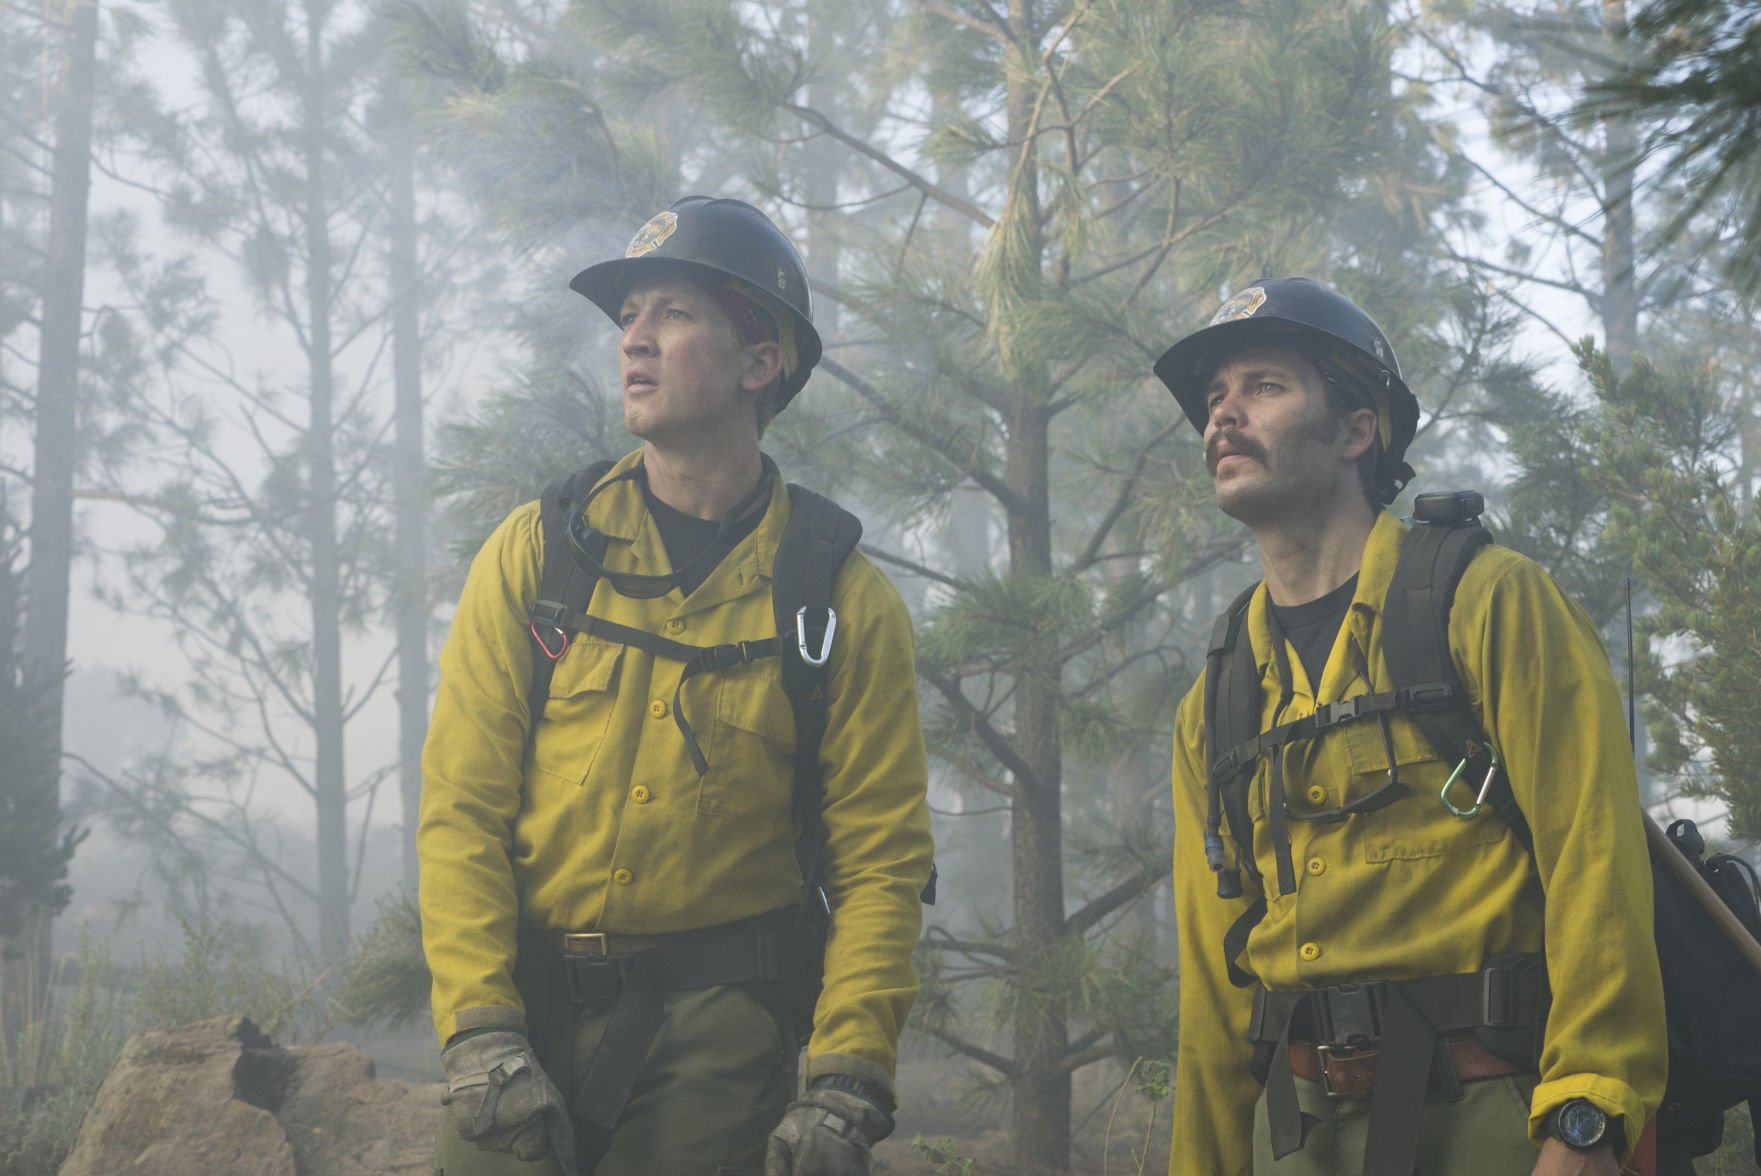 only the brave movie